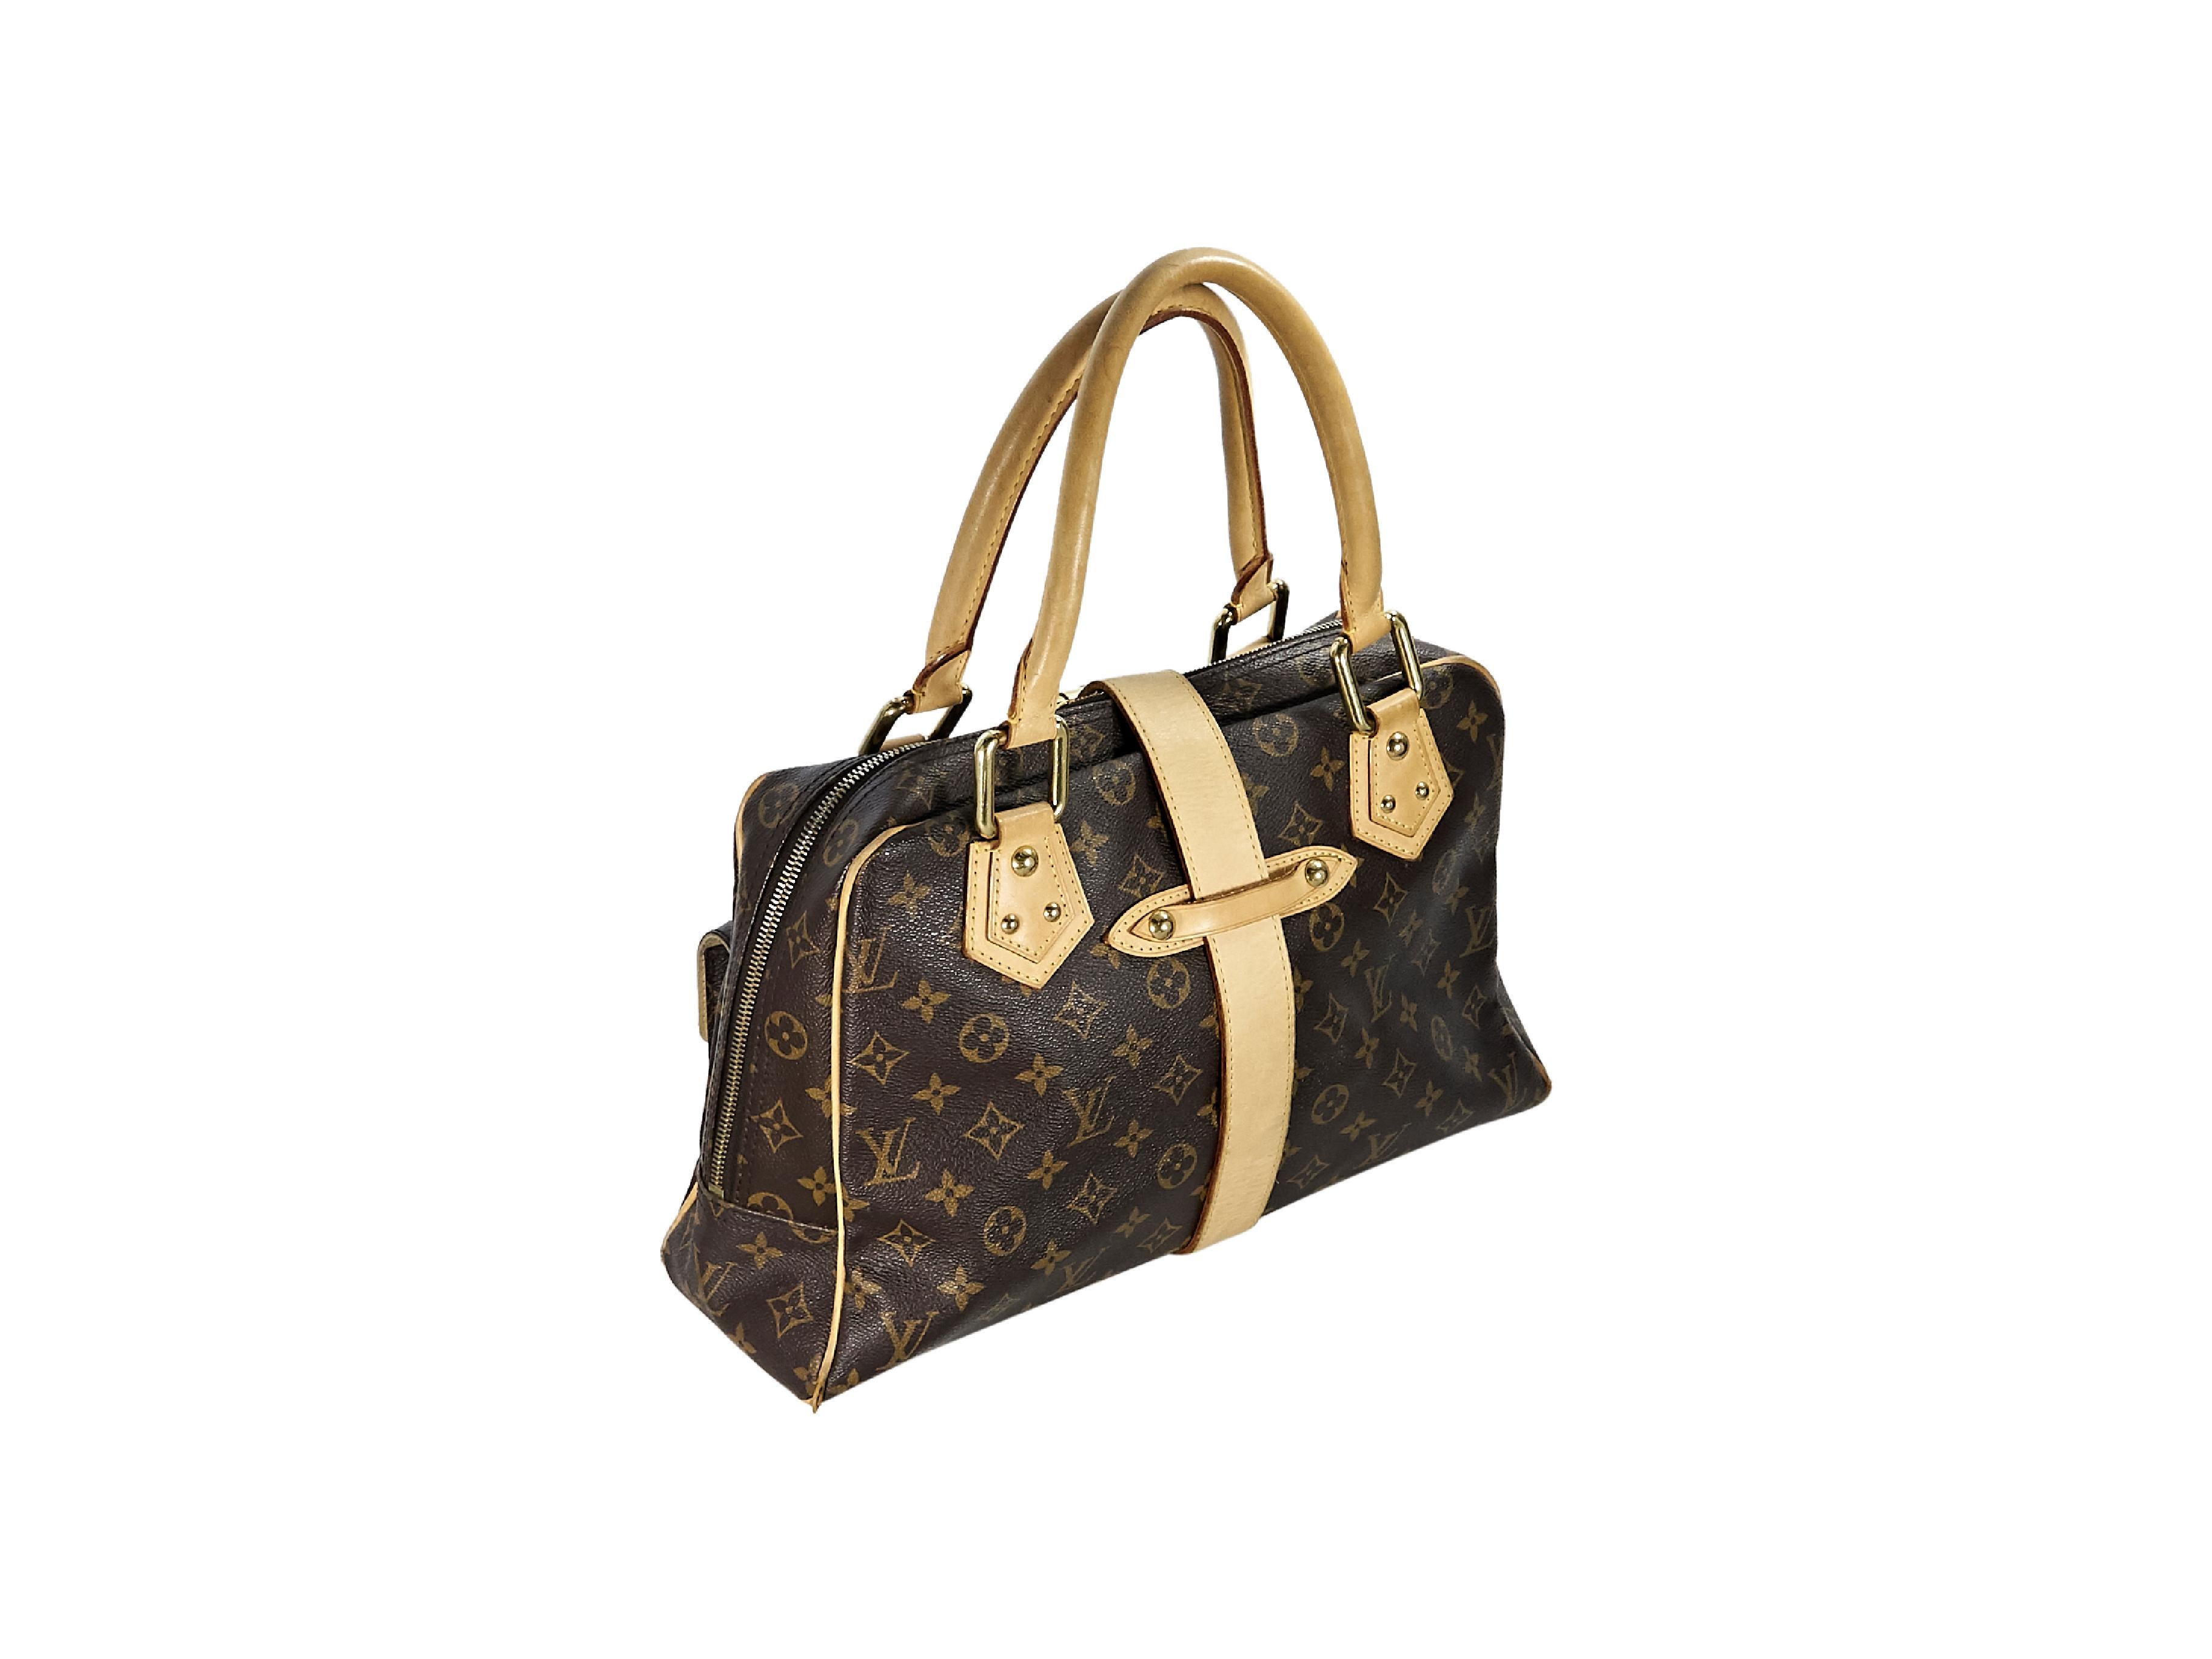 Product details:  Brown monogram coated canvas Manhattan GM bag by Louis Vuitton.  Trimmed with tan leather.  Dual carry handles.  Buckle strap over double top zip closure.  Lined interior with inner slide pocket.  Front push-lock flap pockets. 